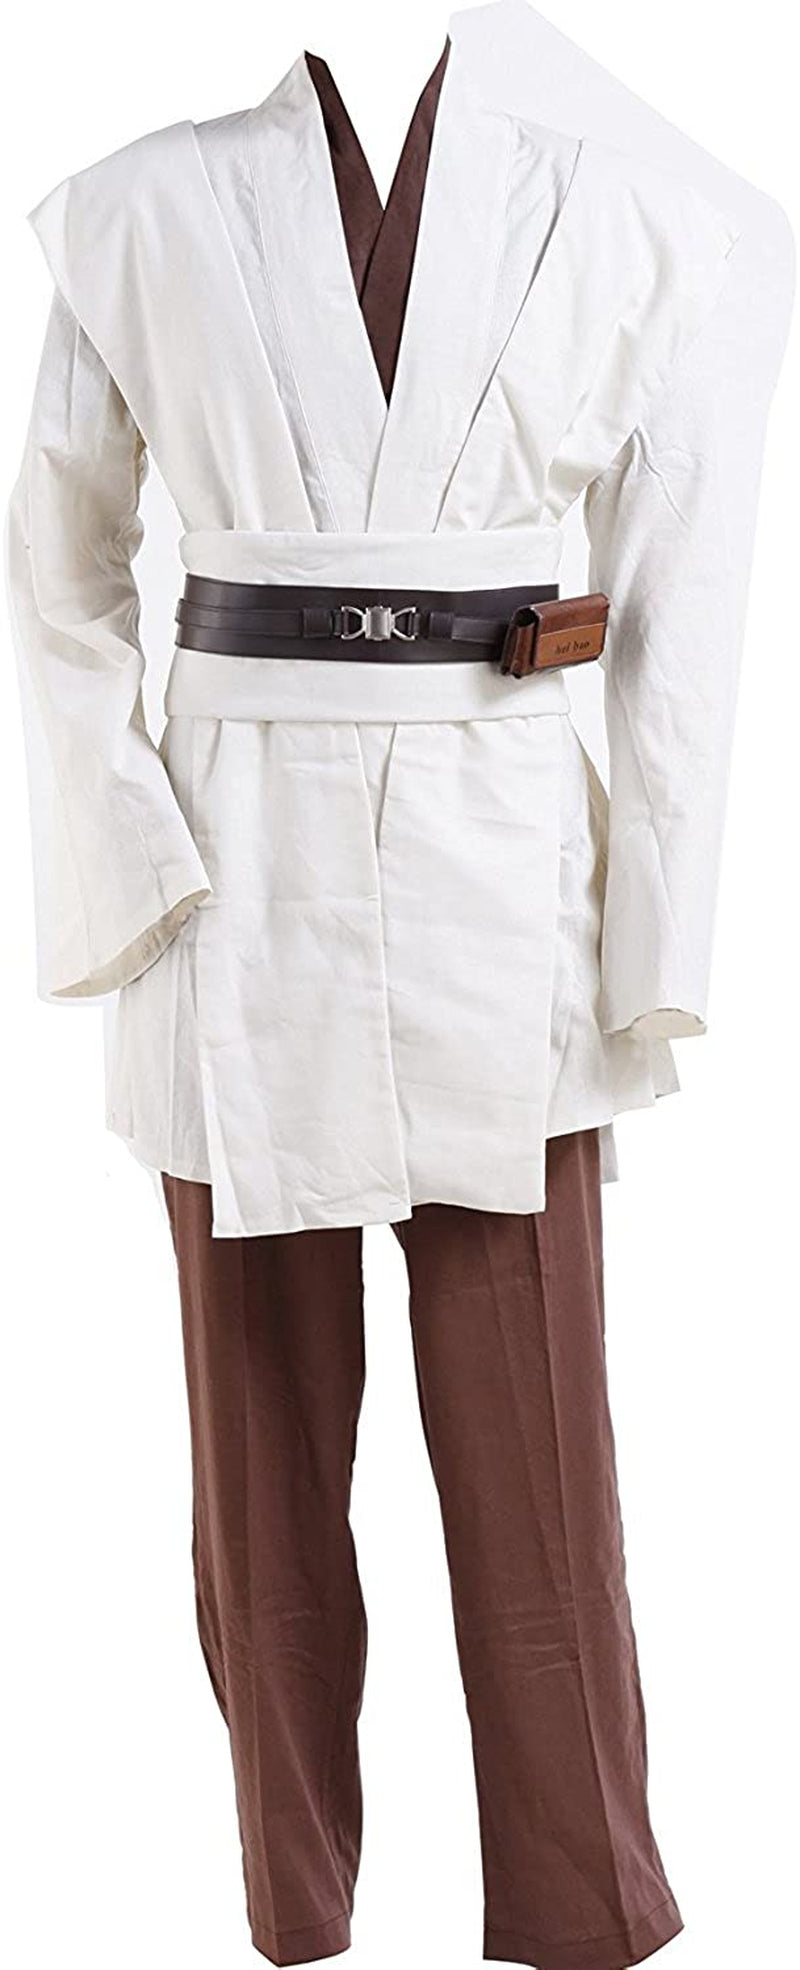 WYKBPX Halloween Tunic Costume Set Cosplay Outfit for Jedi Brown with White Hooded Robe  WYKBPX   